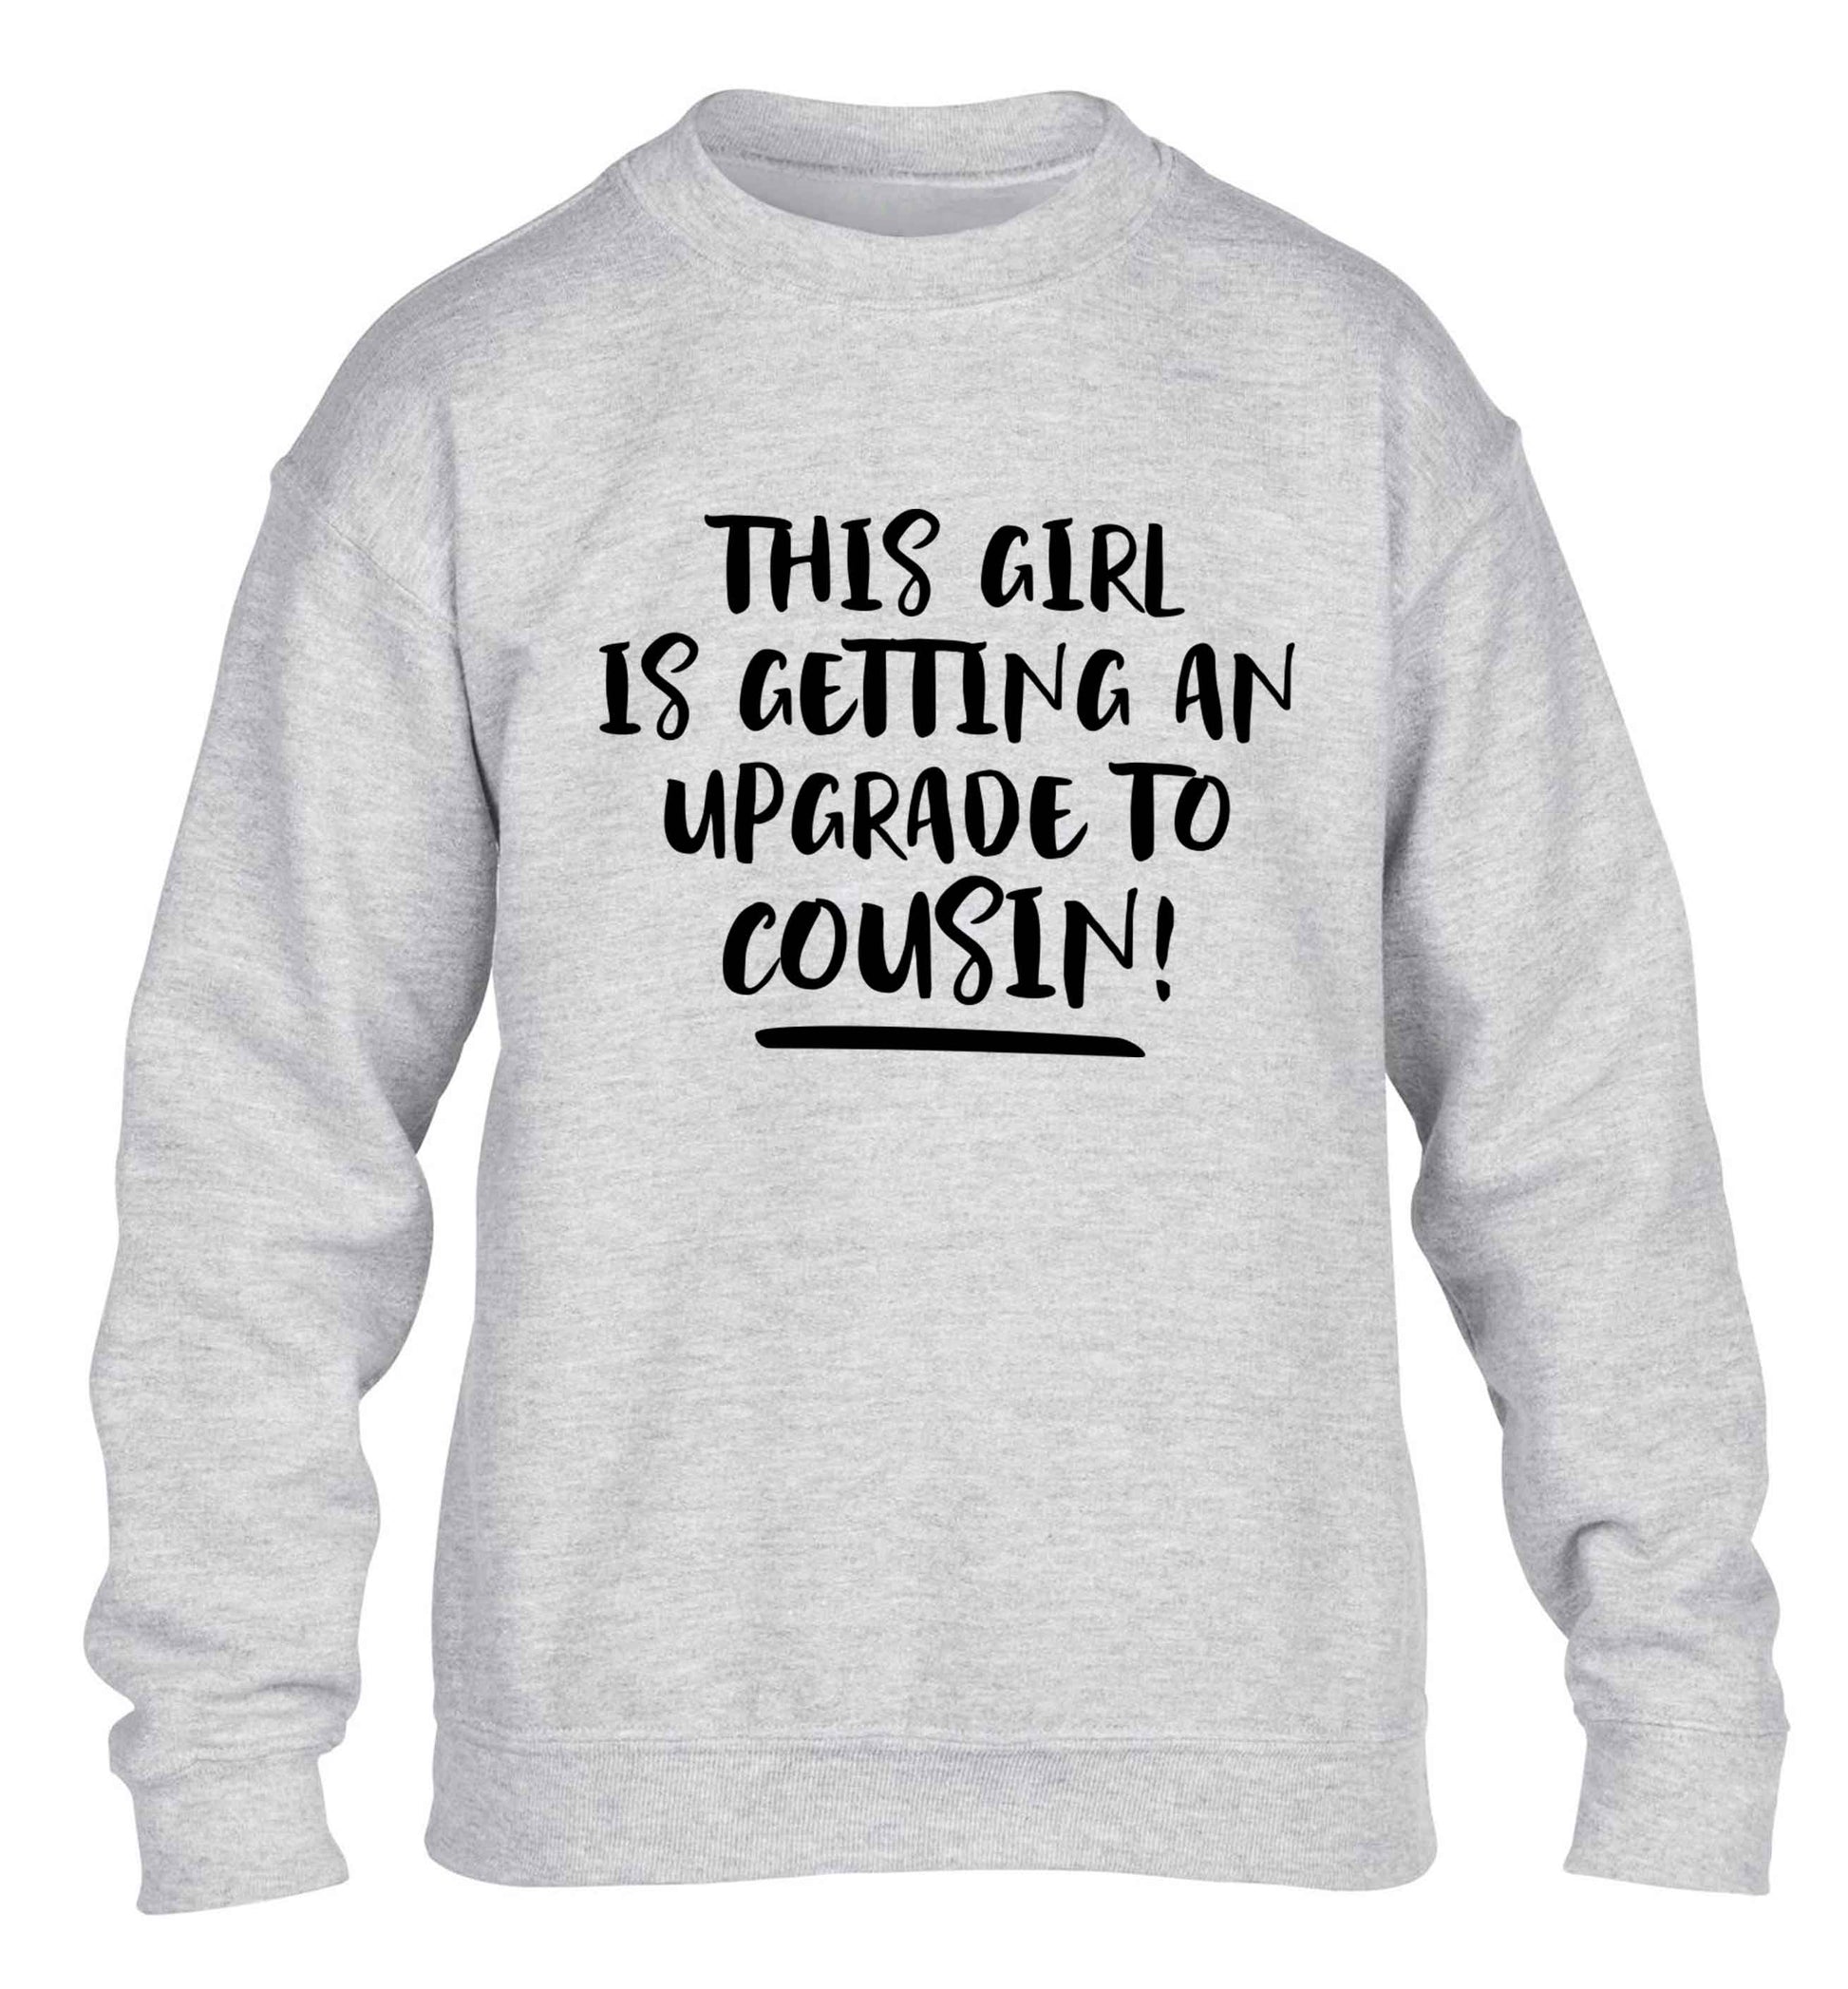 This girl is getting an upgrade to cousin! children's grey sweater 12-13 Years